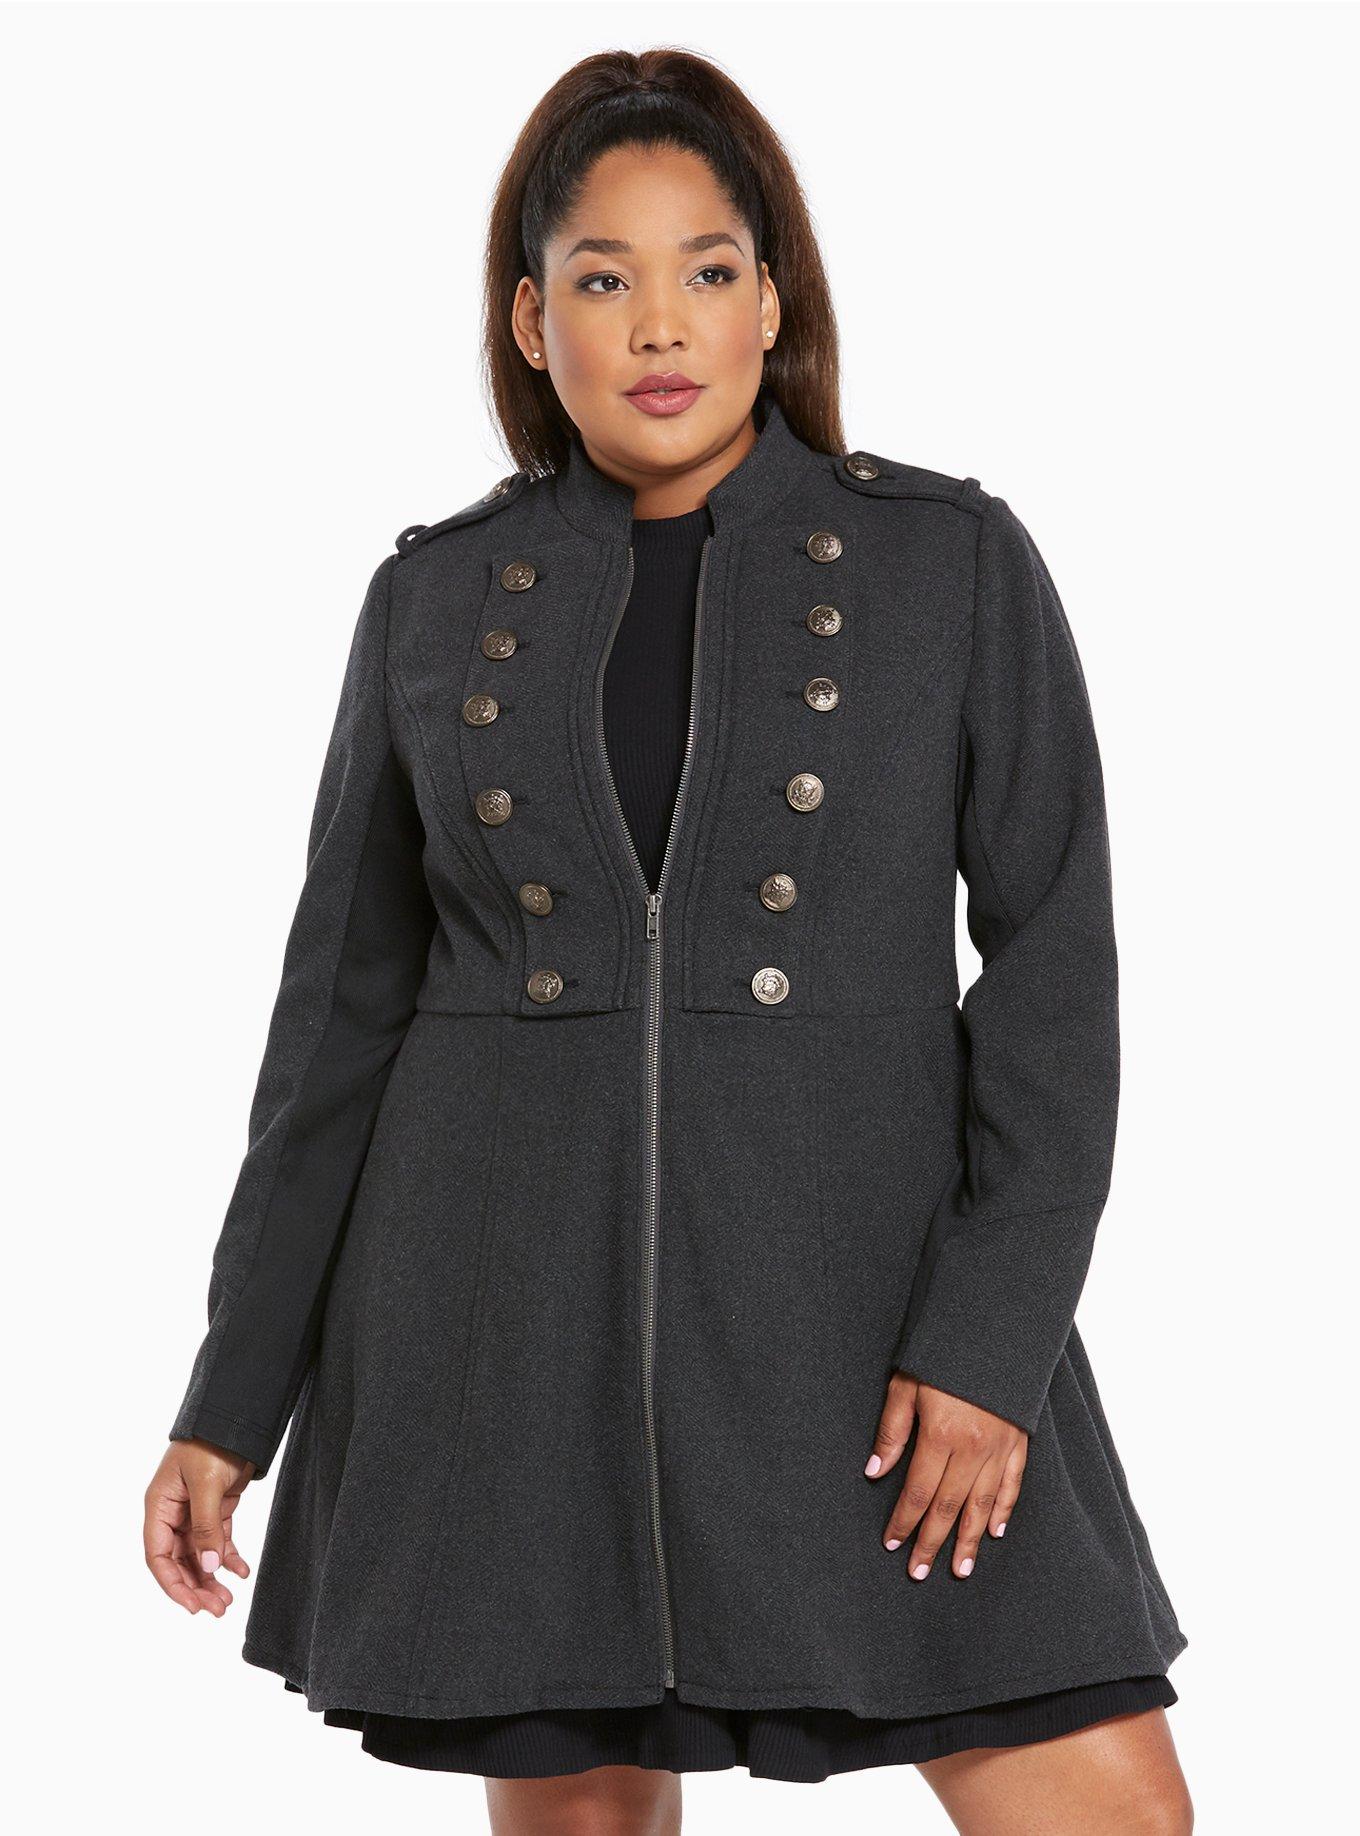 Torrid NWT Military Jacket - Luxe Ponte Black Size 6X Max Stretch Open Front